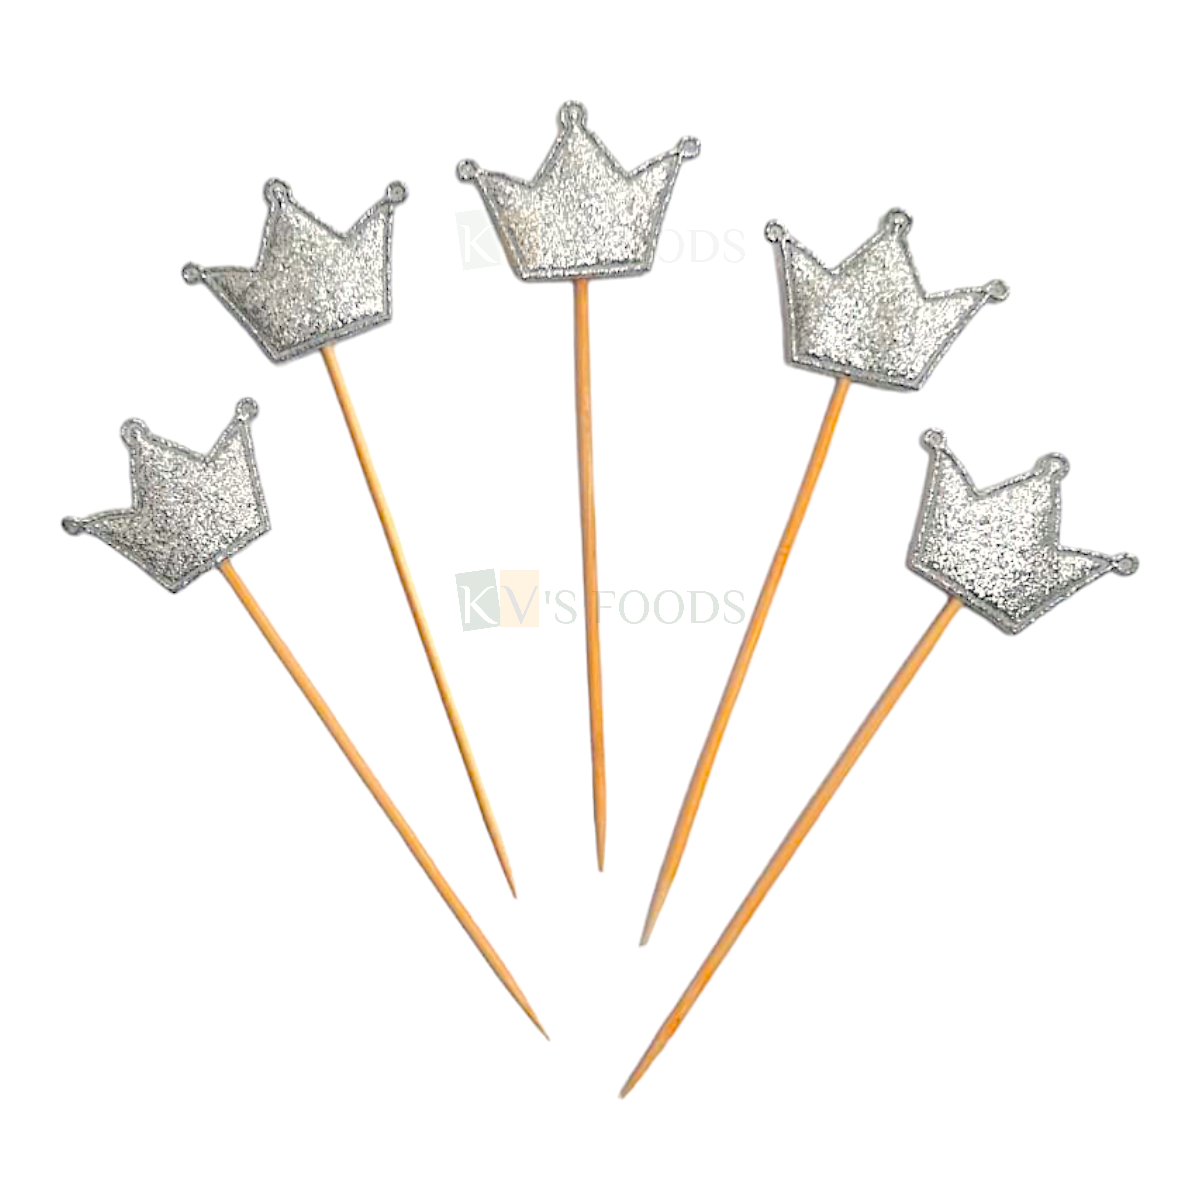 10 PCS Shiny Glittery Silver Crown Shape Toothpick Cake Topper Cupcake Toppers Wedding New Years Cakes Decorations Happy Birthday Theme Fruit Pick Foamed Bamboo Toothpicks DIY Cake Decorations